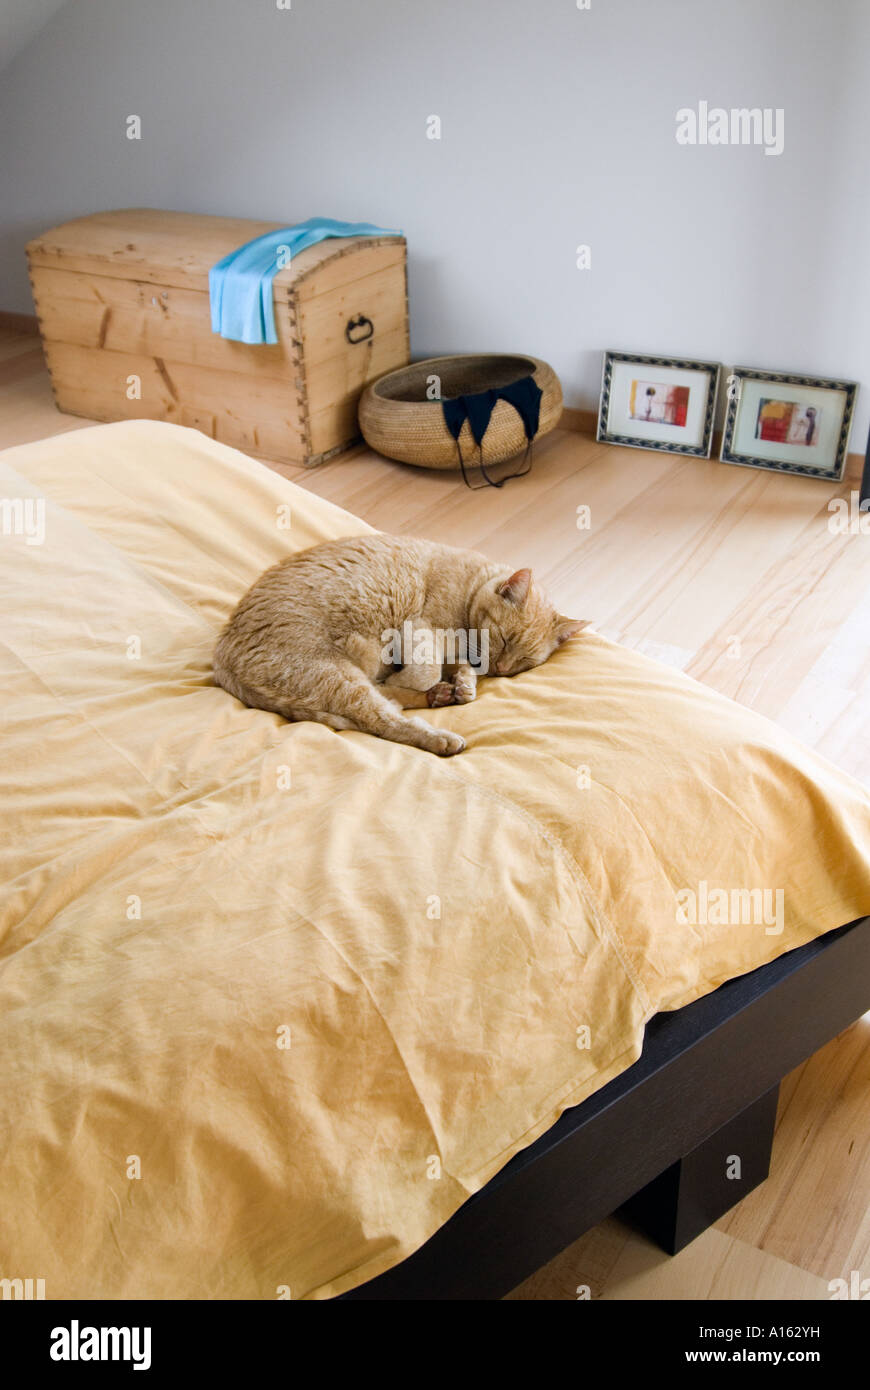 Cat sleeping on a bed Stock Photo